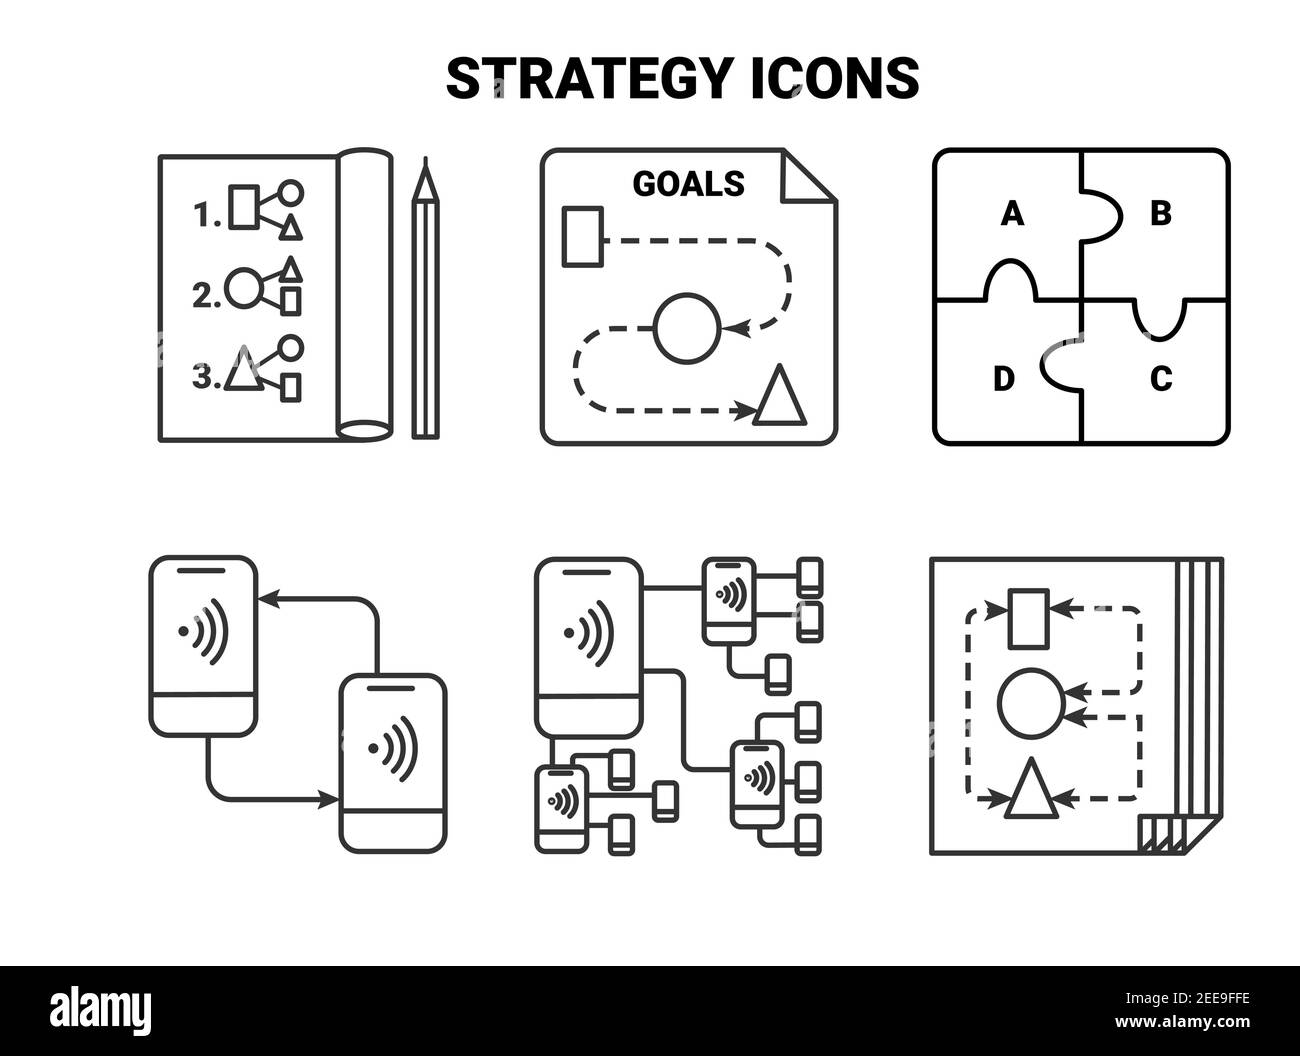 Strategy icons outline style vector illustration Stock Vector